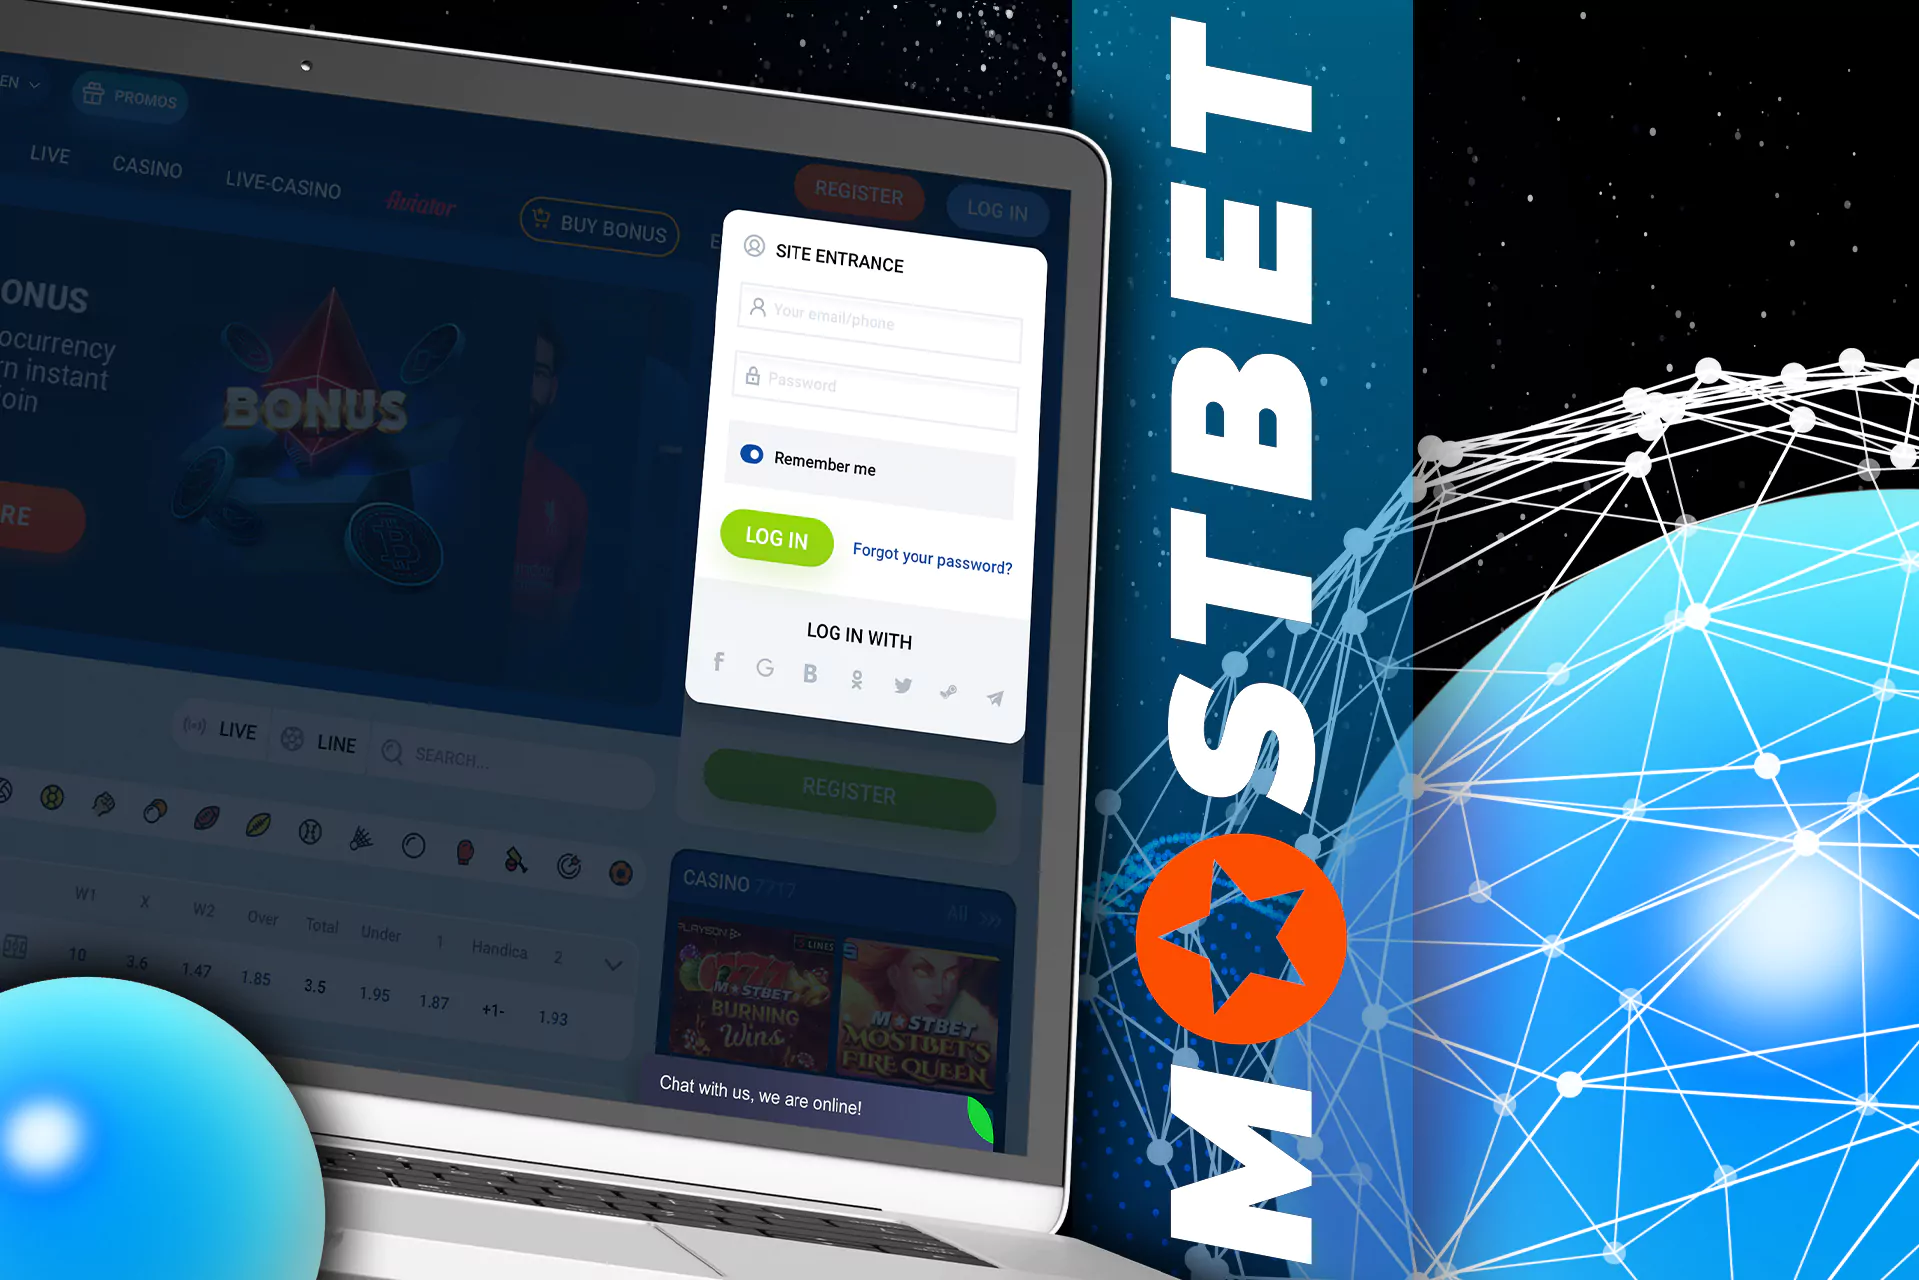 Revolutionize Your Mostbet Betting Company and Casino in Qatar With These Easy-peasy Tips